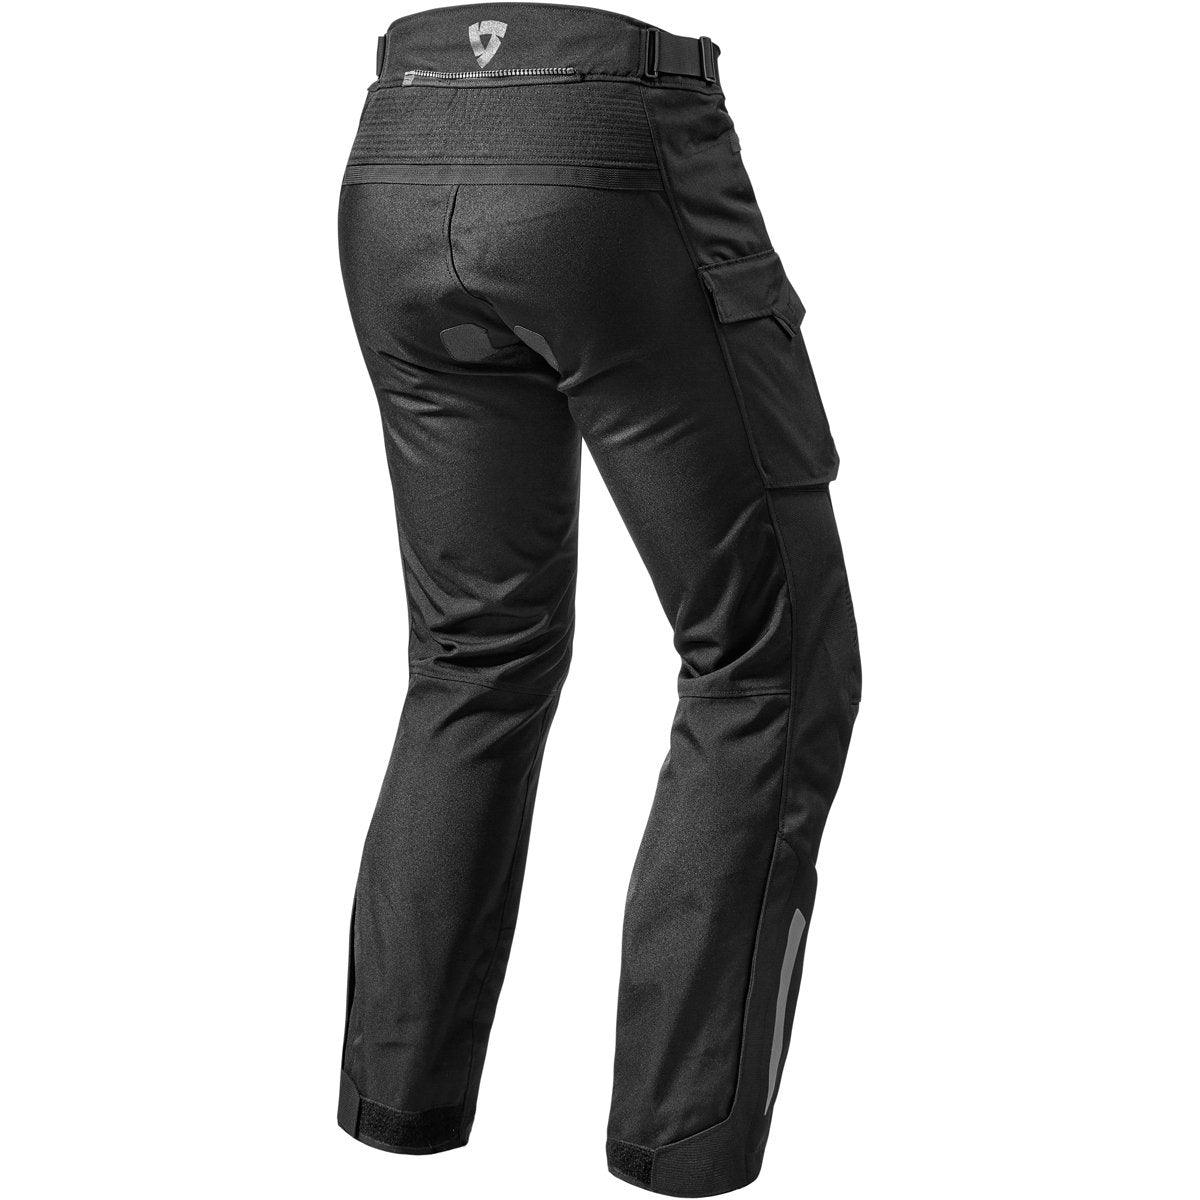 Rev It! Enterprise 2 Overtrousers Reg WP Black - Motorcycle Overtrousers